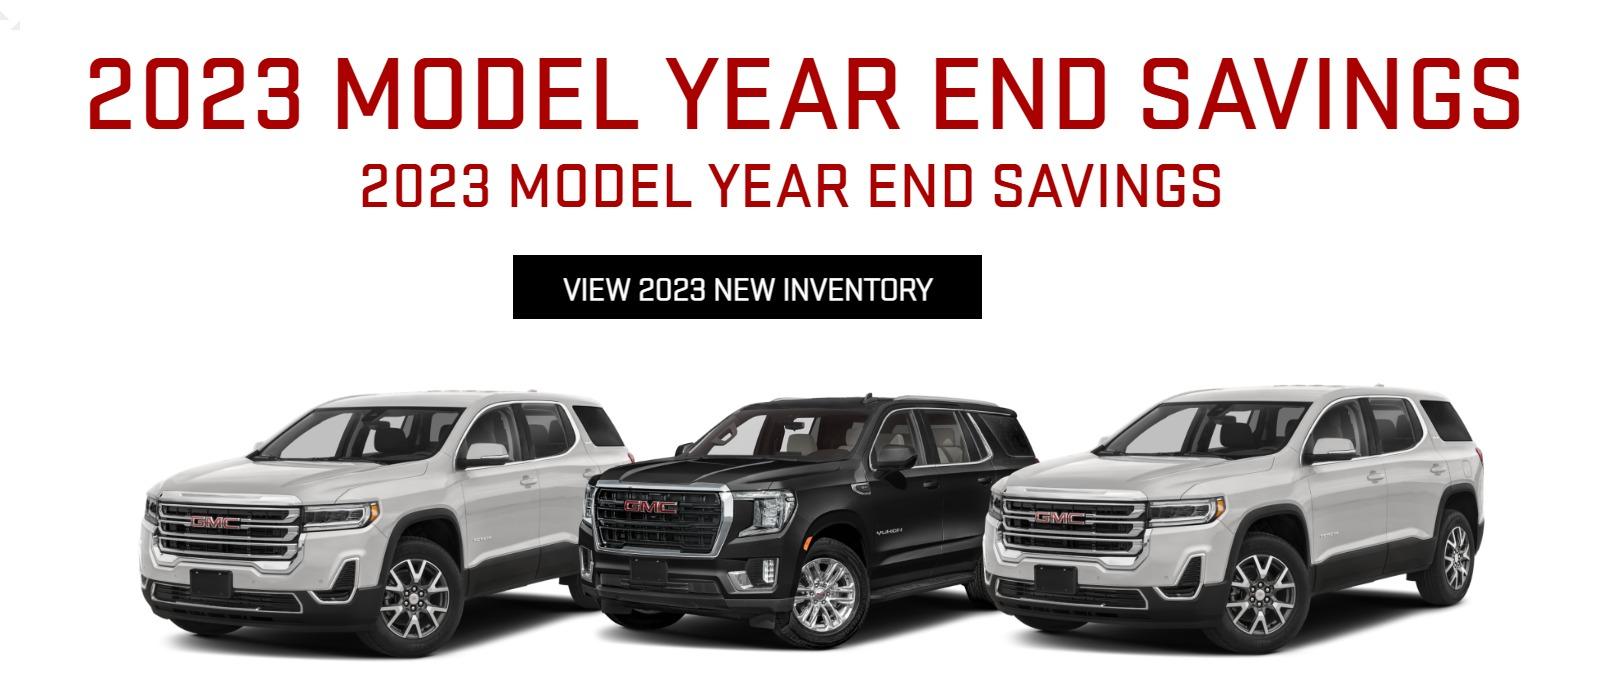 2023 Model Year End Savings
Hurry in these won't last long